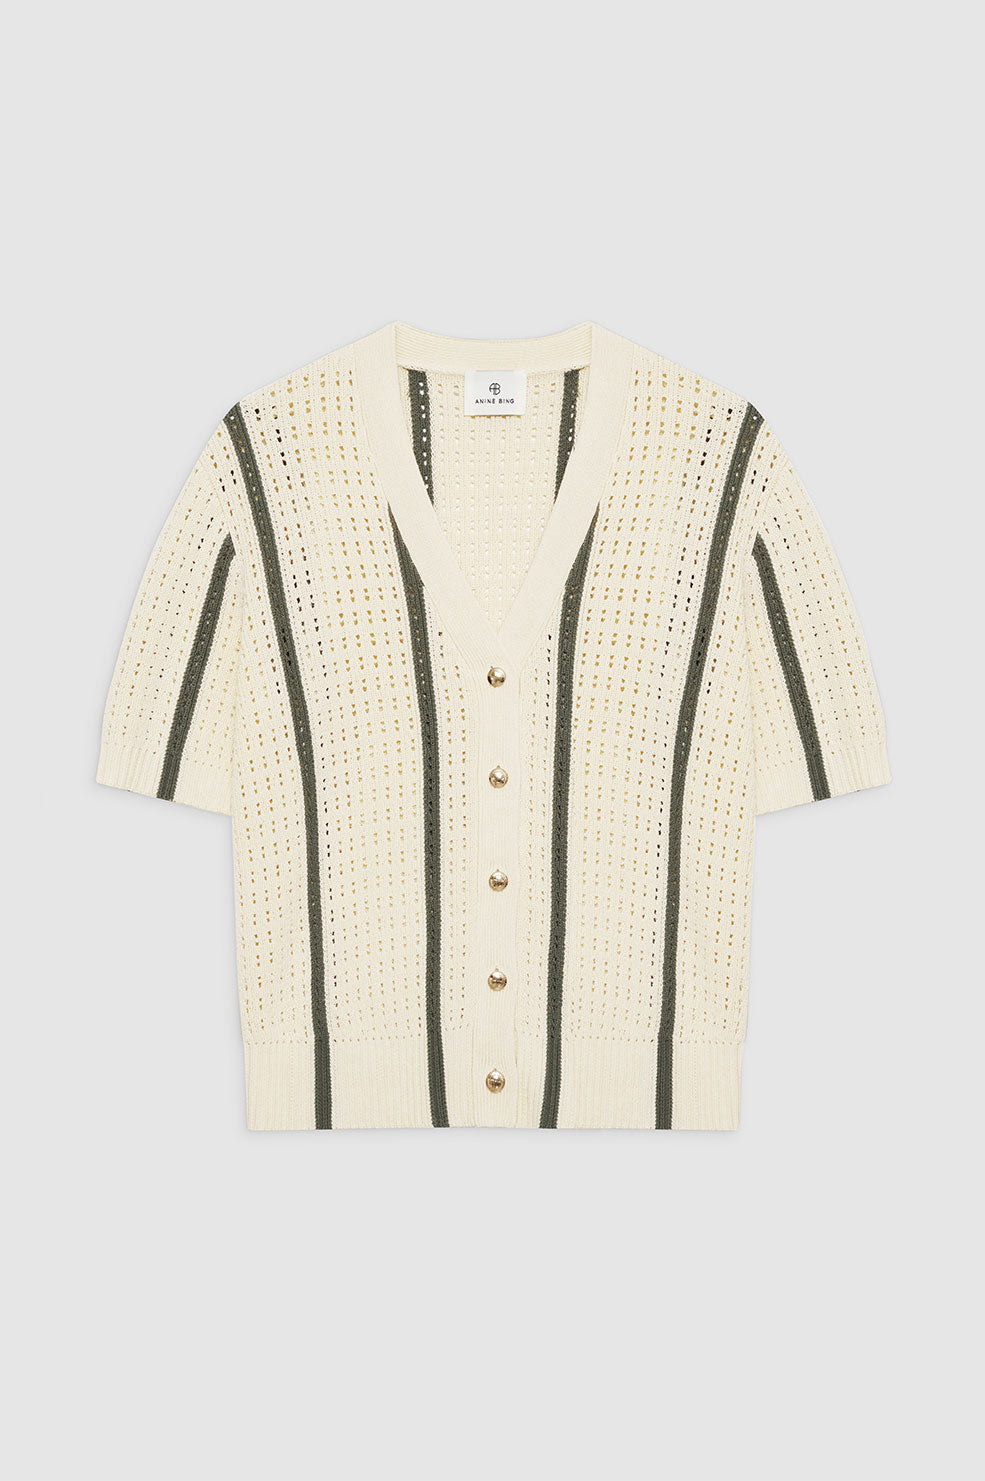 ANINE BING Camryn Cardigan - Ivory And Army Green Stripe - Front View